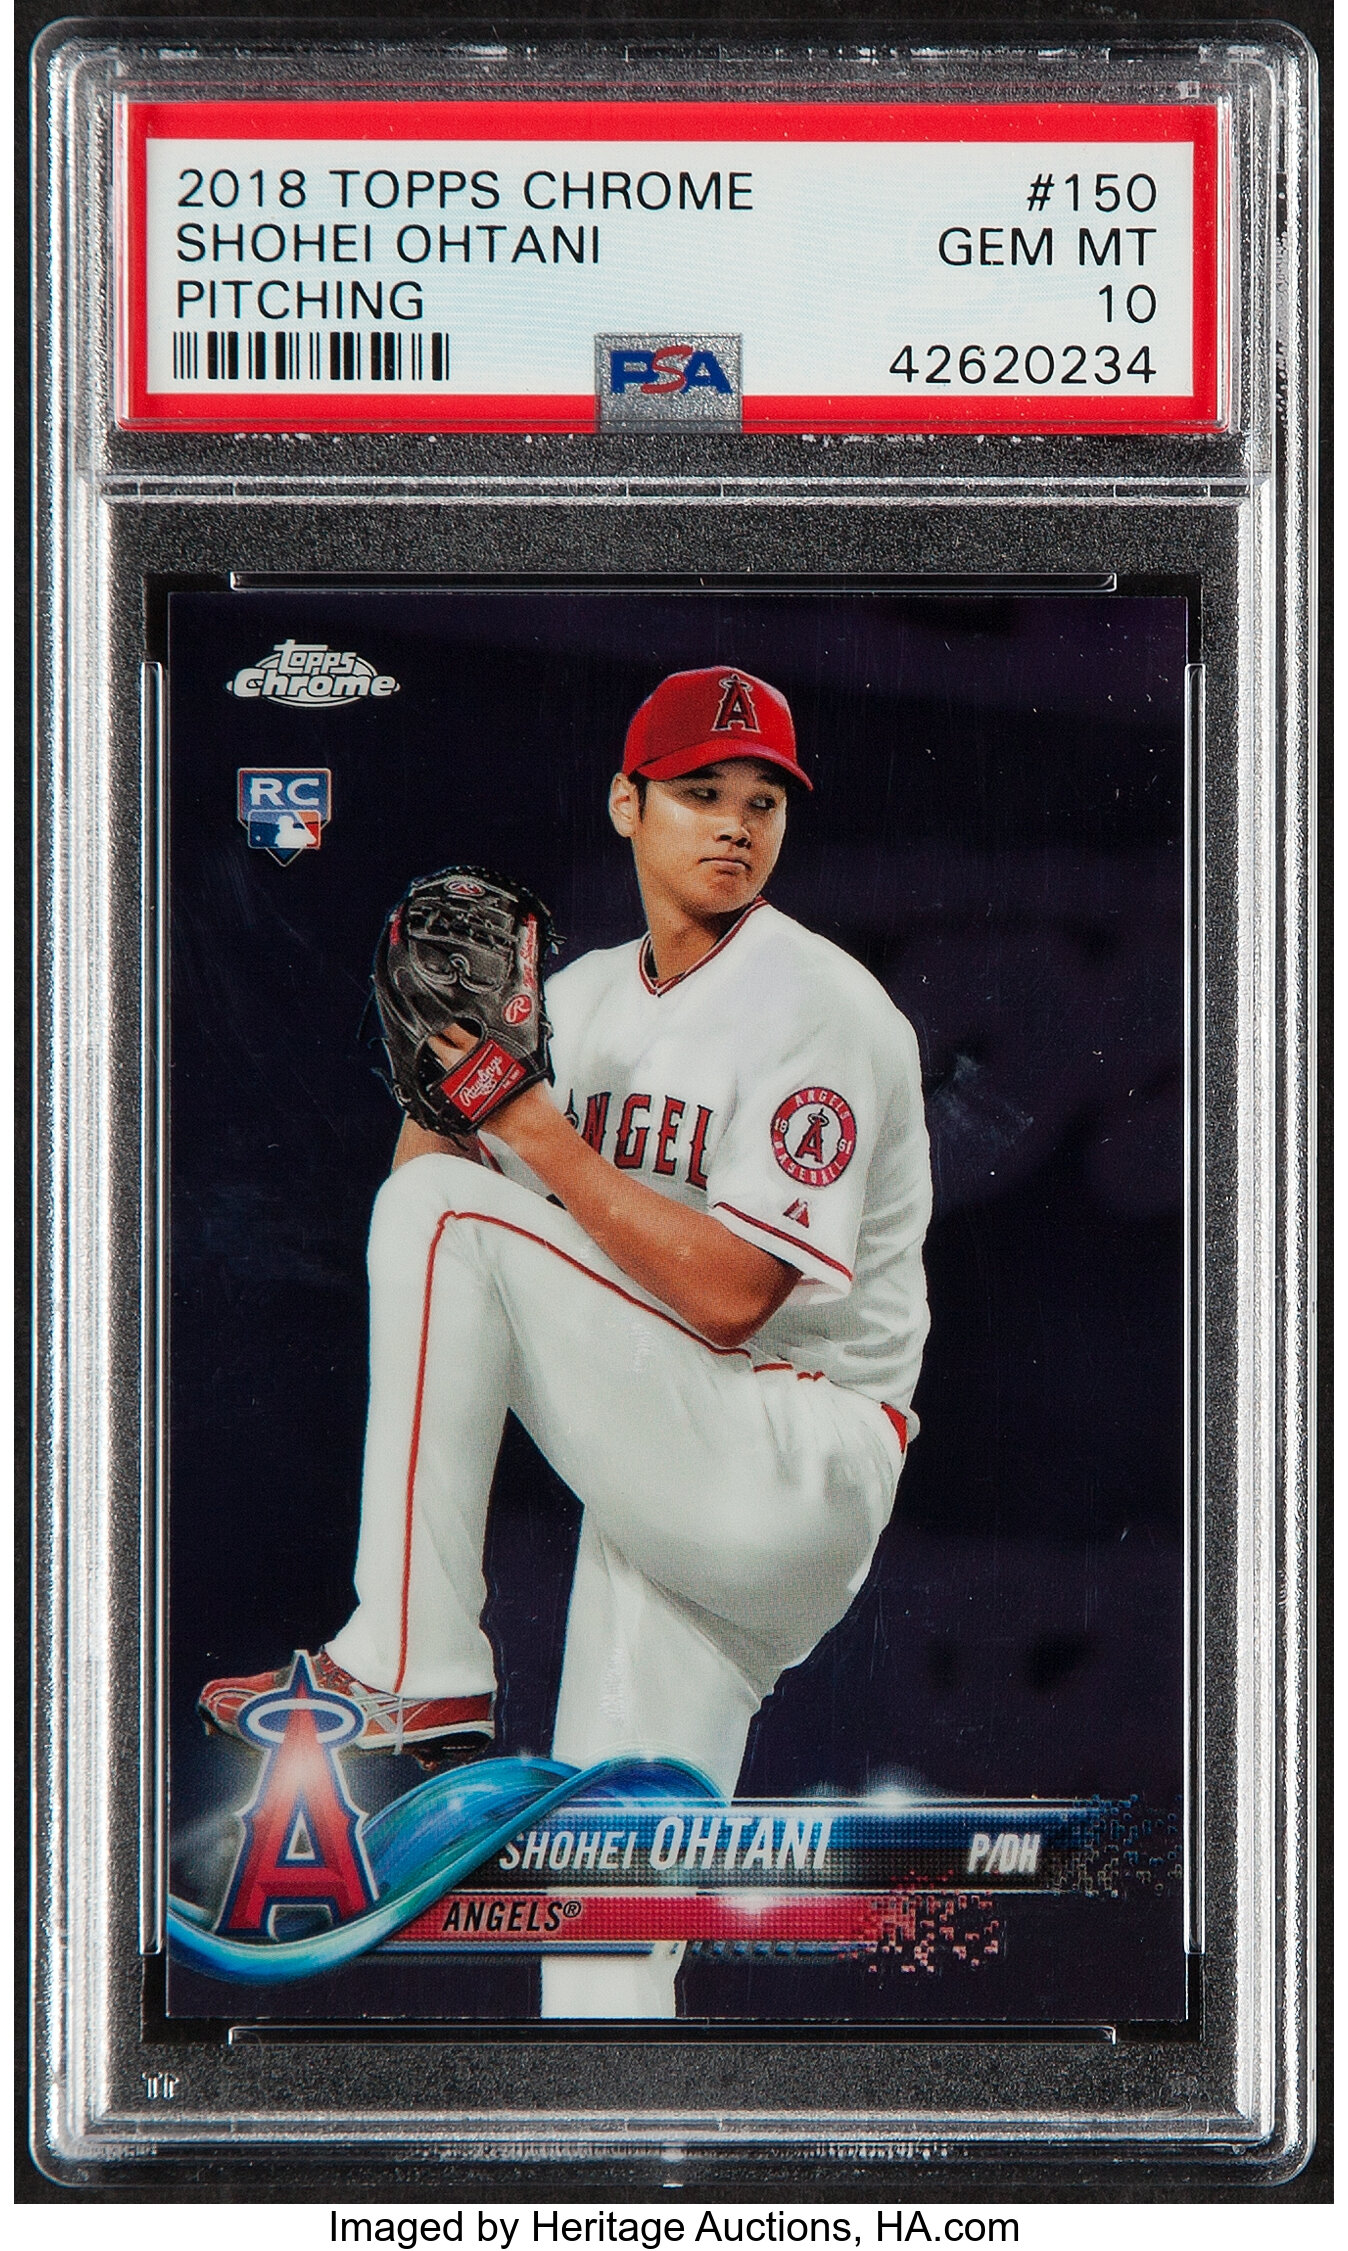 2018 Topps Chrome Refractor #150 Shohei Ohtani, Pitching Rookie